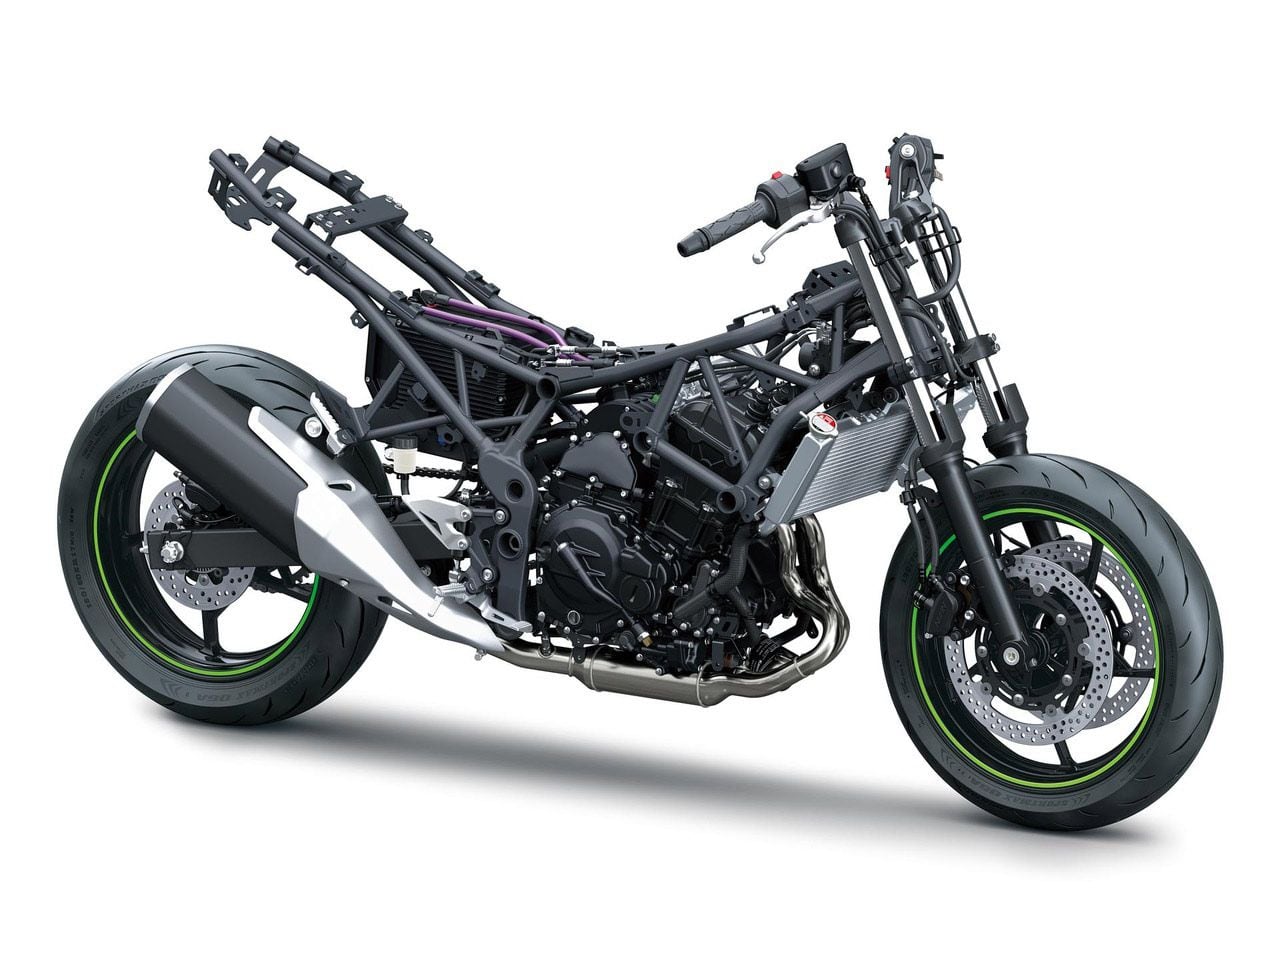 The Ninja 7 Hybrid’s fuel tank is located in the rear subframe.